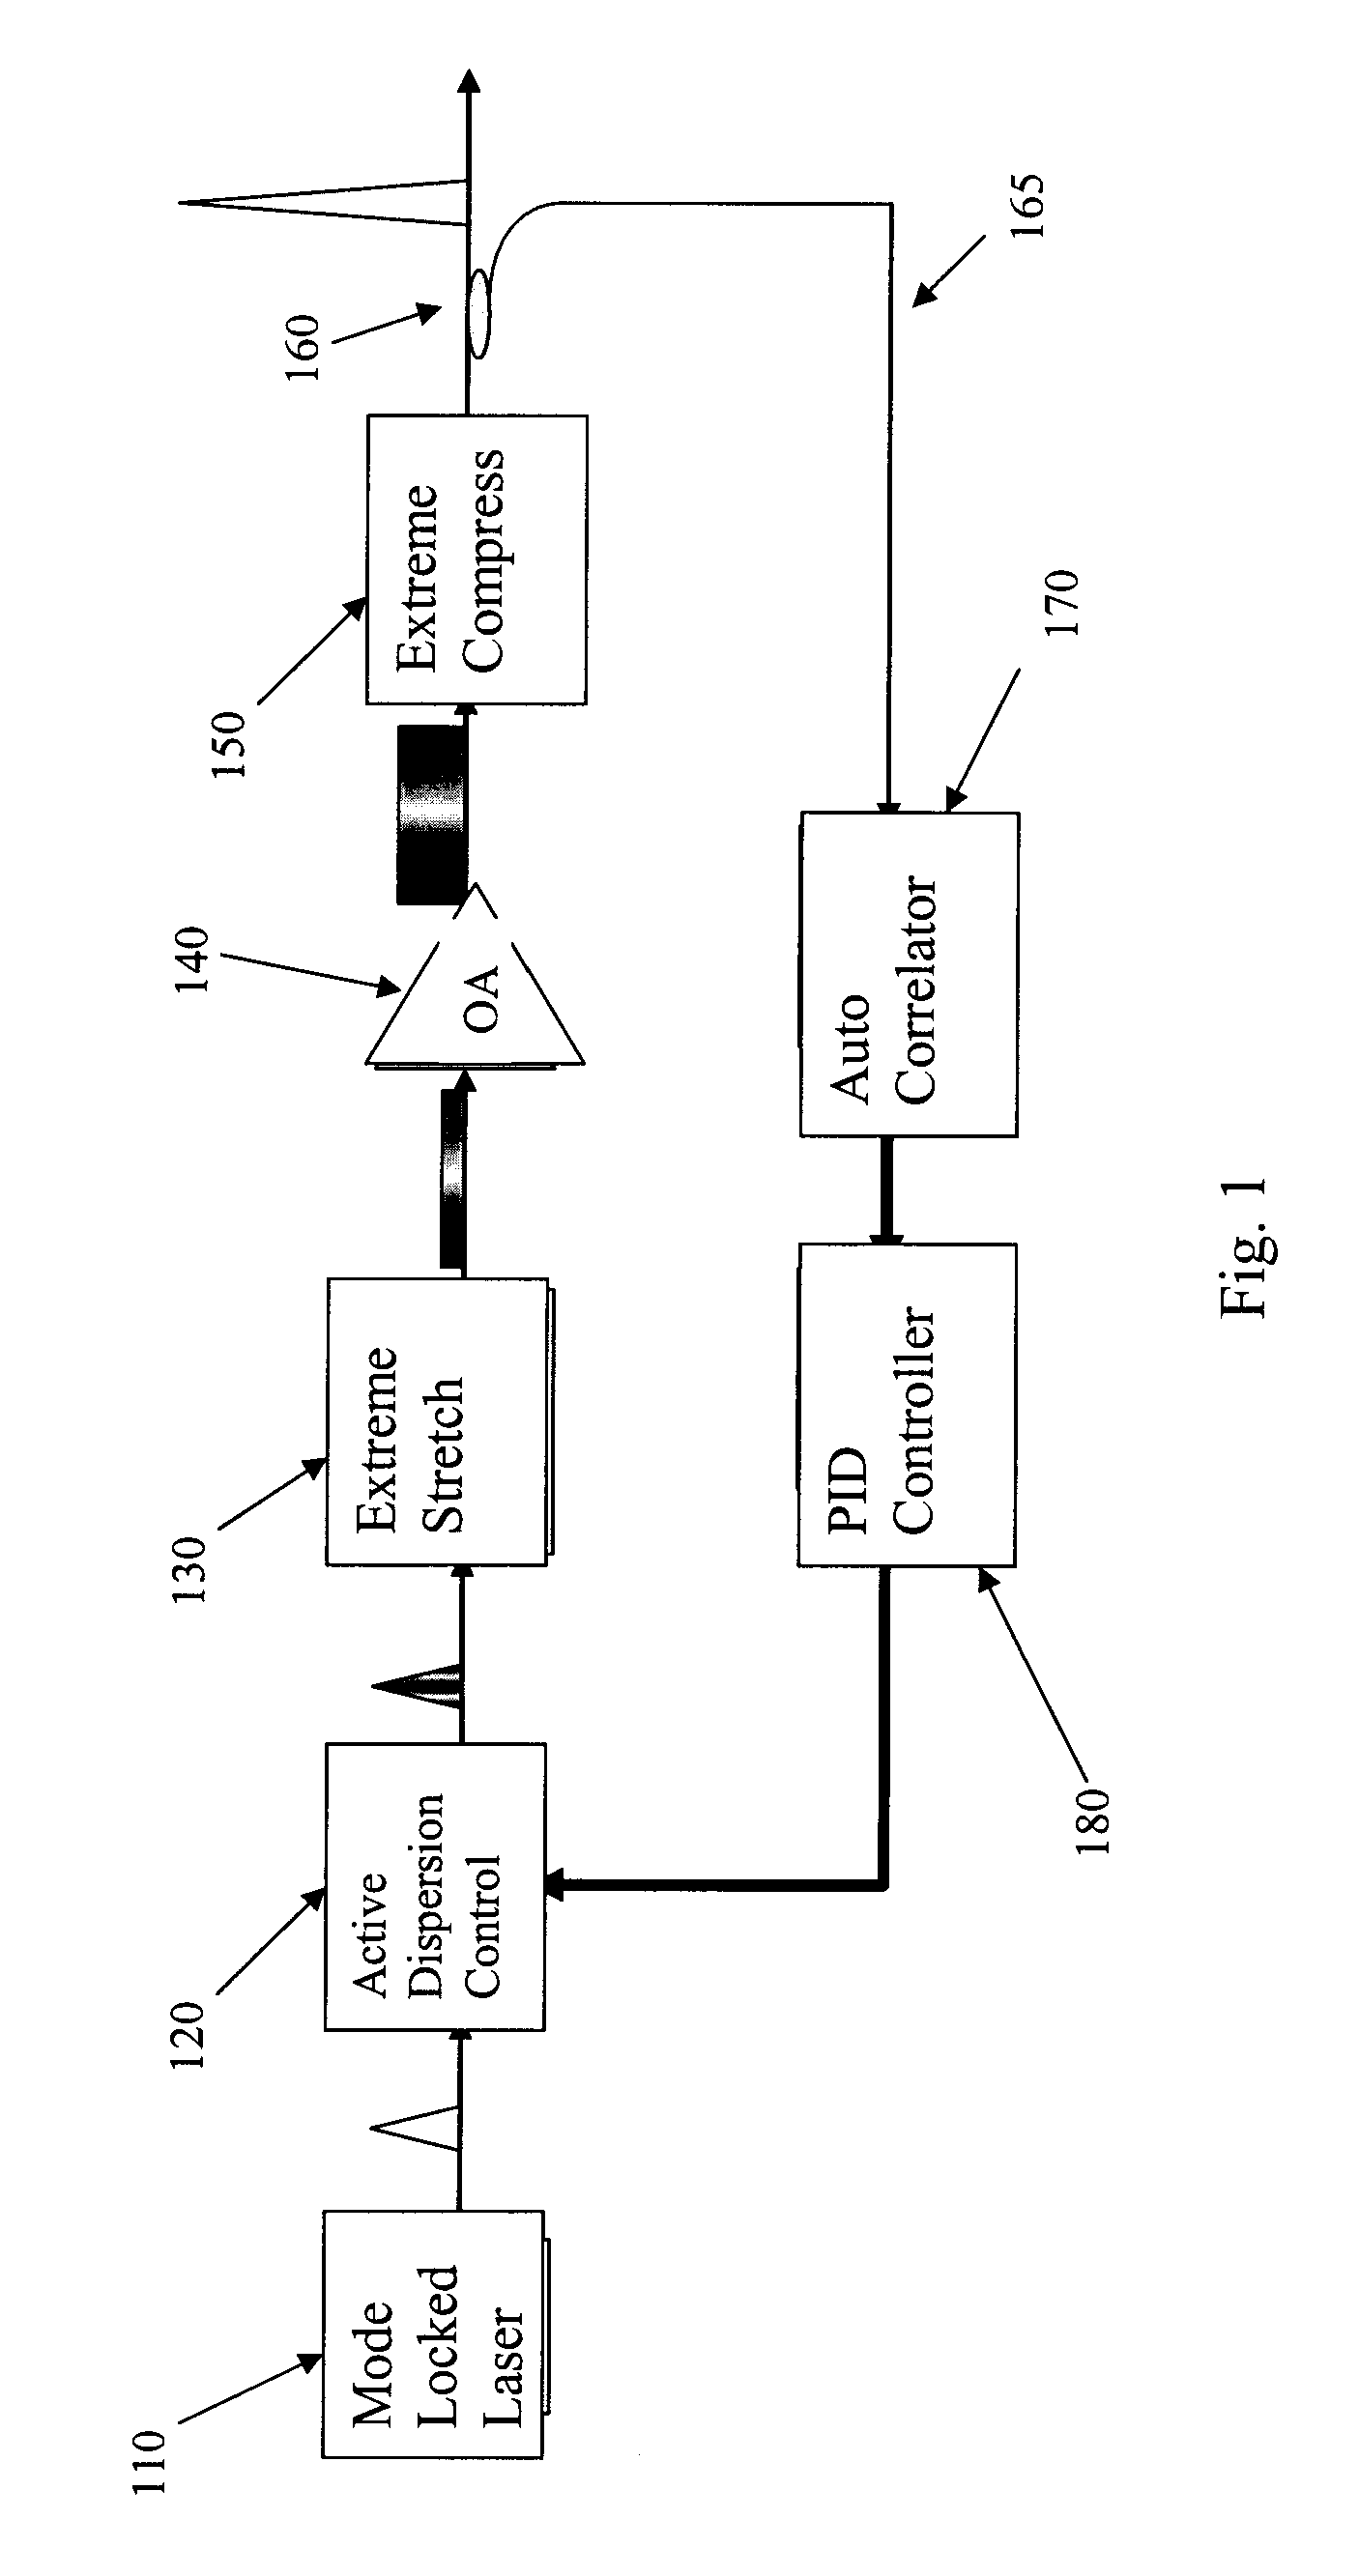 Extreme chirped pulse amplification and phase control